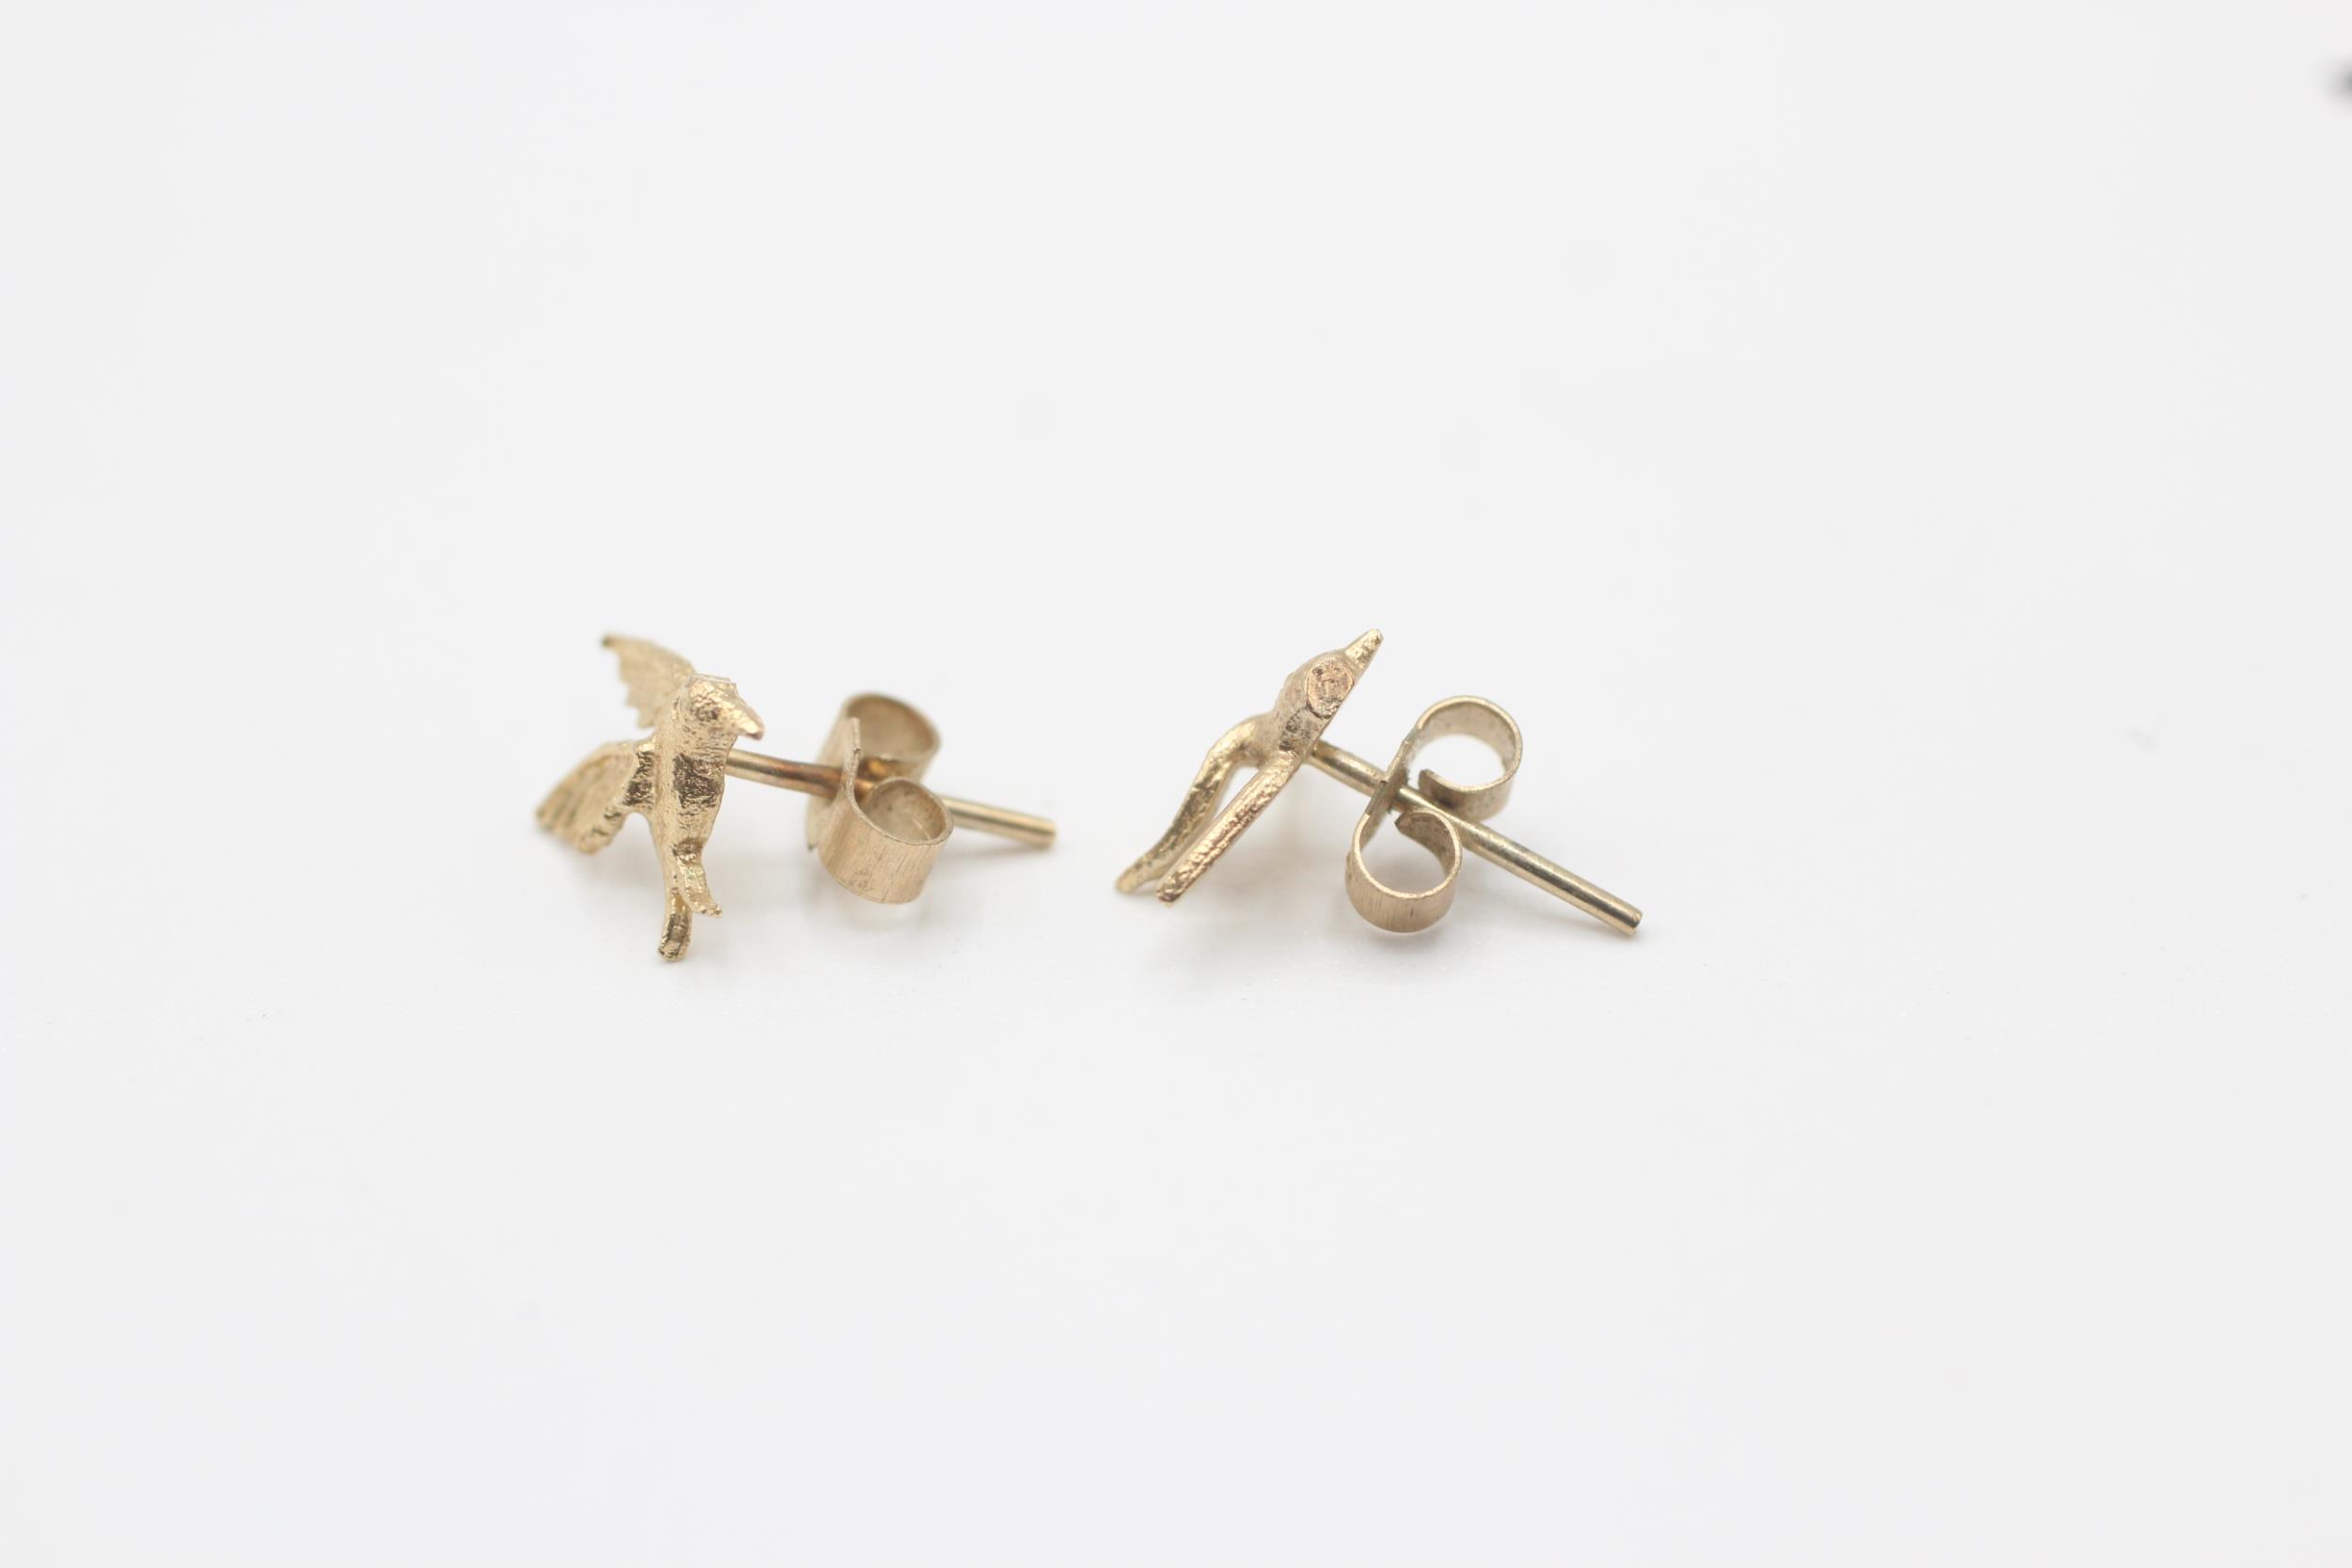 9ct gold bird stud earring with scroll backs - 0.5 g - Image 4 of 4